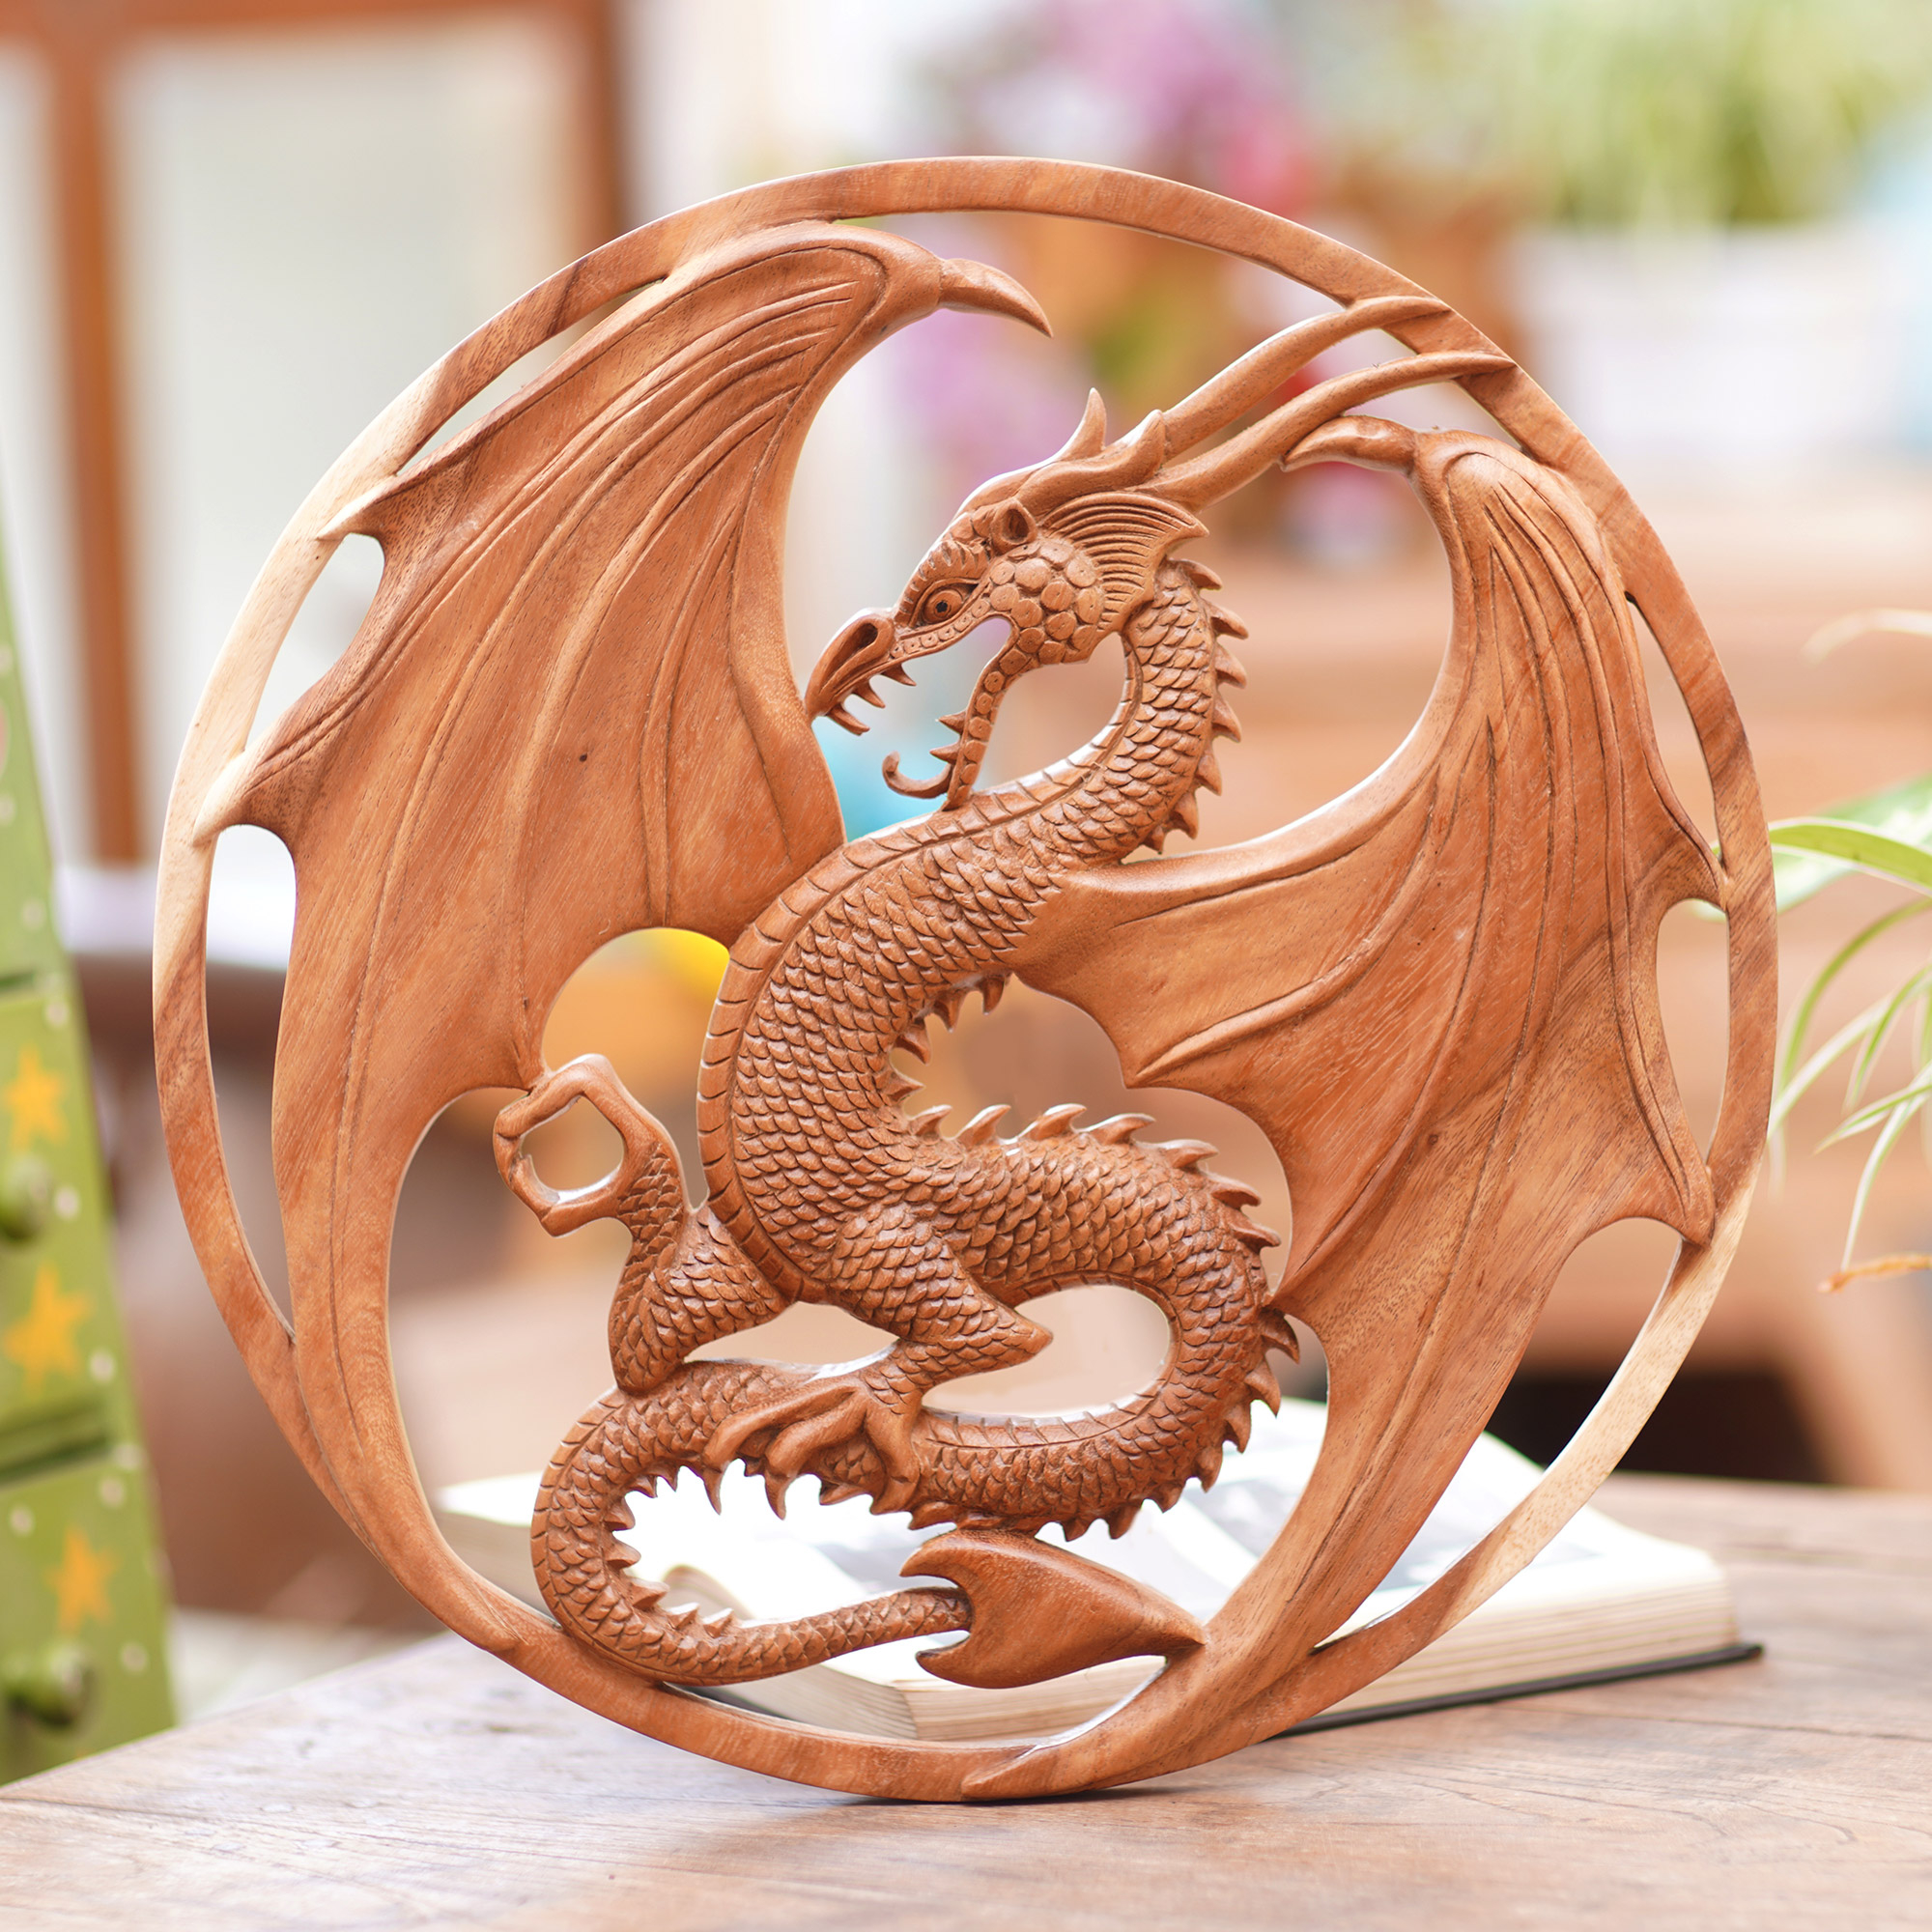 Dragon Motif Wood Wall Art Relief Panel from Indonesia - Proud